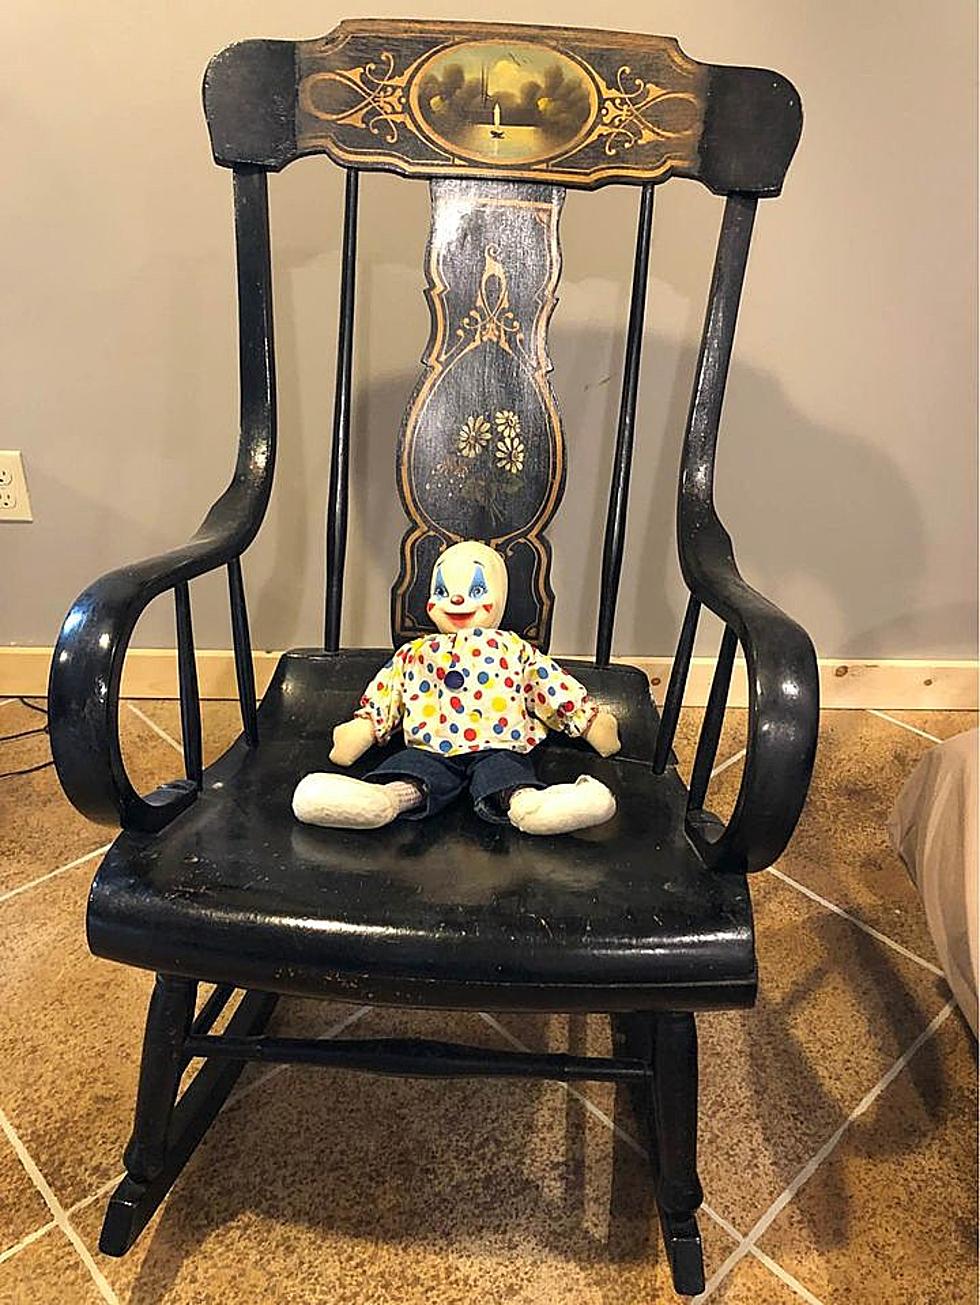 Eerie Clown Doll &#038; Haunted Rocking Chair Listed For Sale